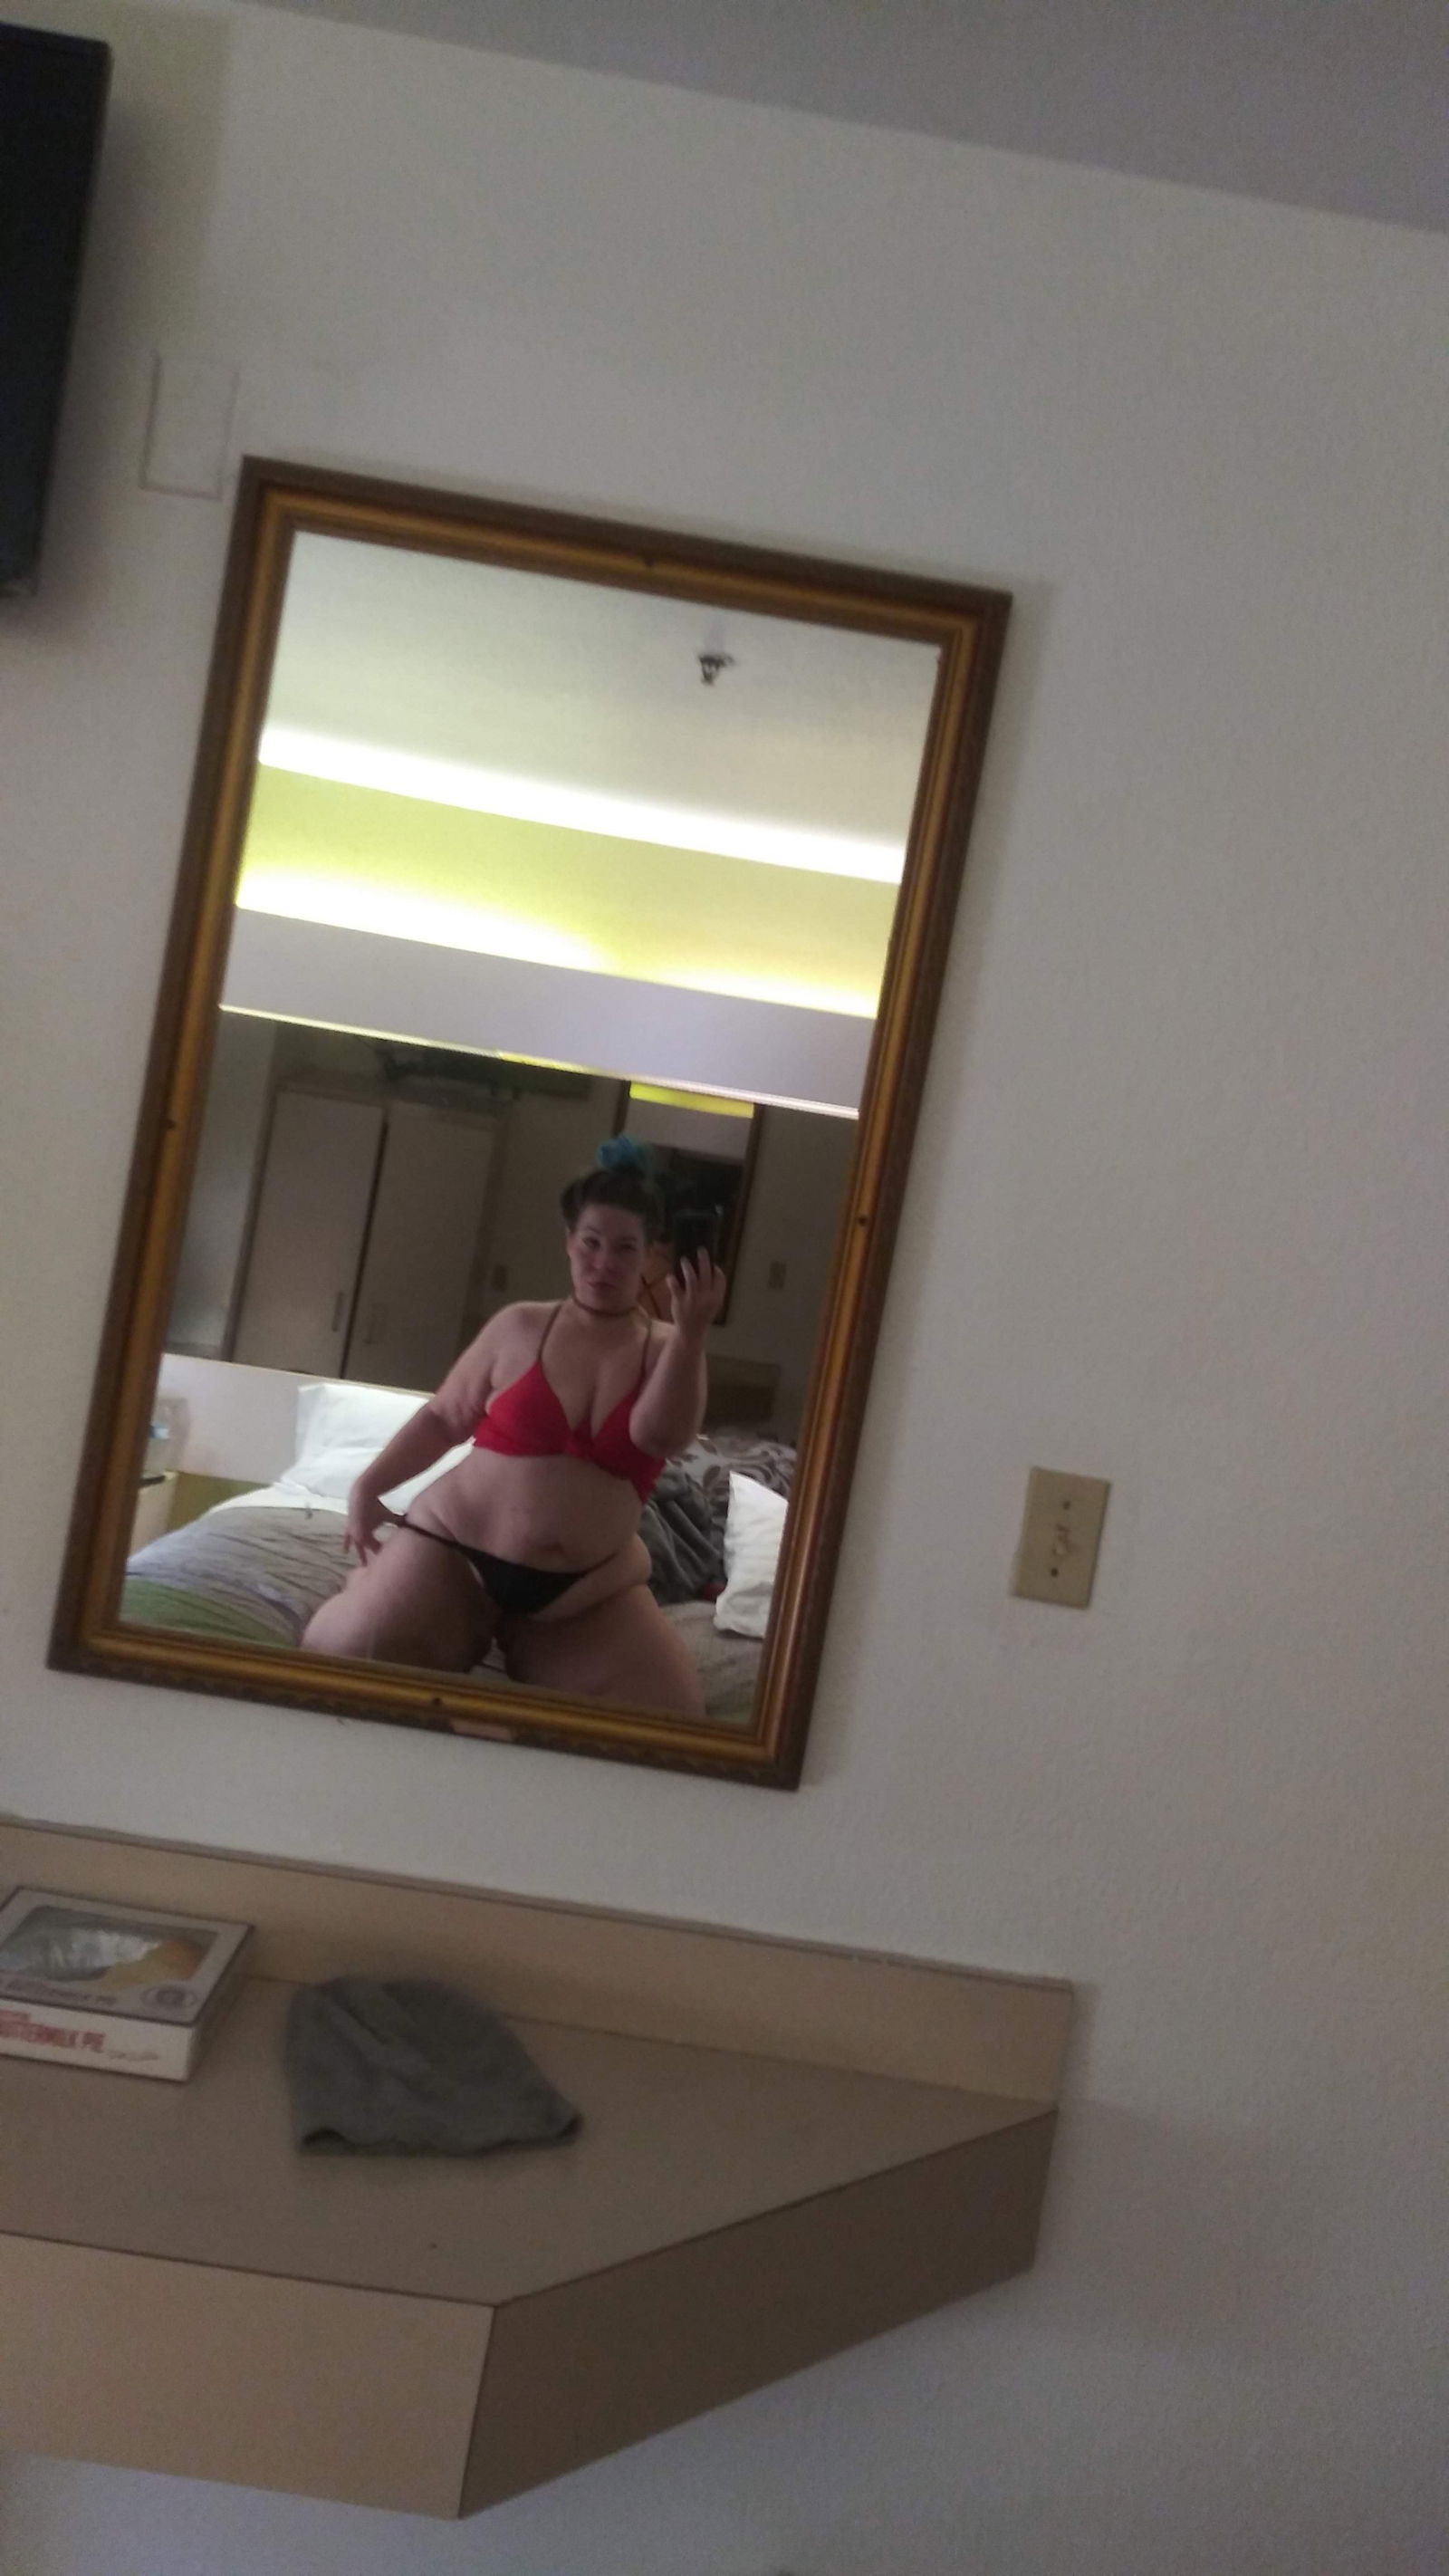 Photo by Miss Arianna with the username @MissArianna, who is a star user,  June 29, 2020 at 5:42 AM. The post is about the topic Sexy BBWs and the text says 'CHK ME OUT!! CONTENT CREATOR EXTRODIARE
http://missarianna.tumblr.com/
https://onlyfans.com/miss-arianna
http://www.xvideos.com/video46082731/verification_video'